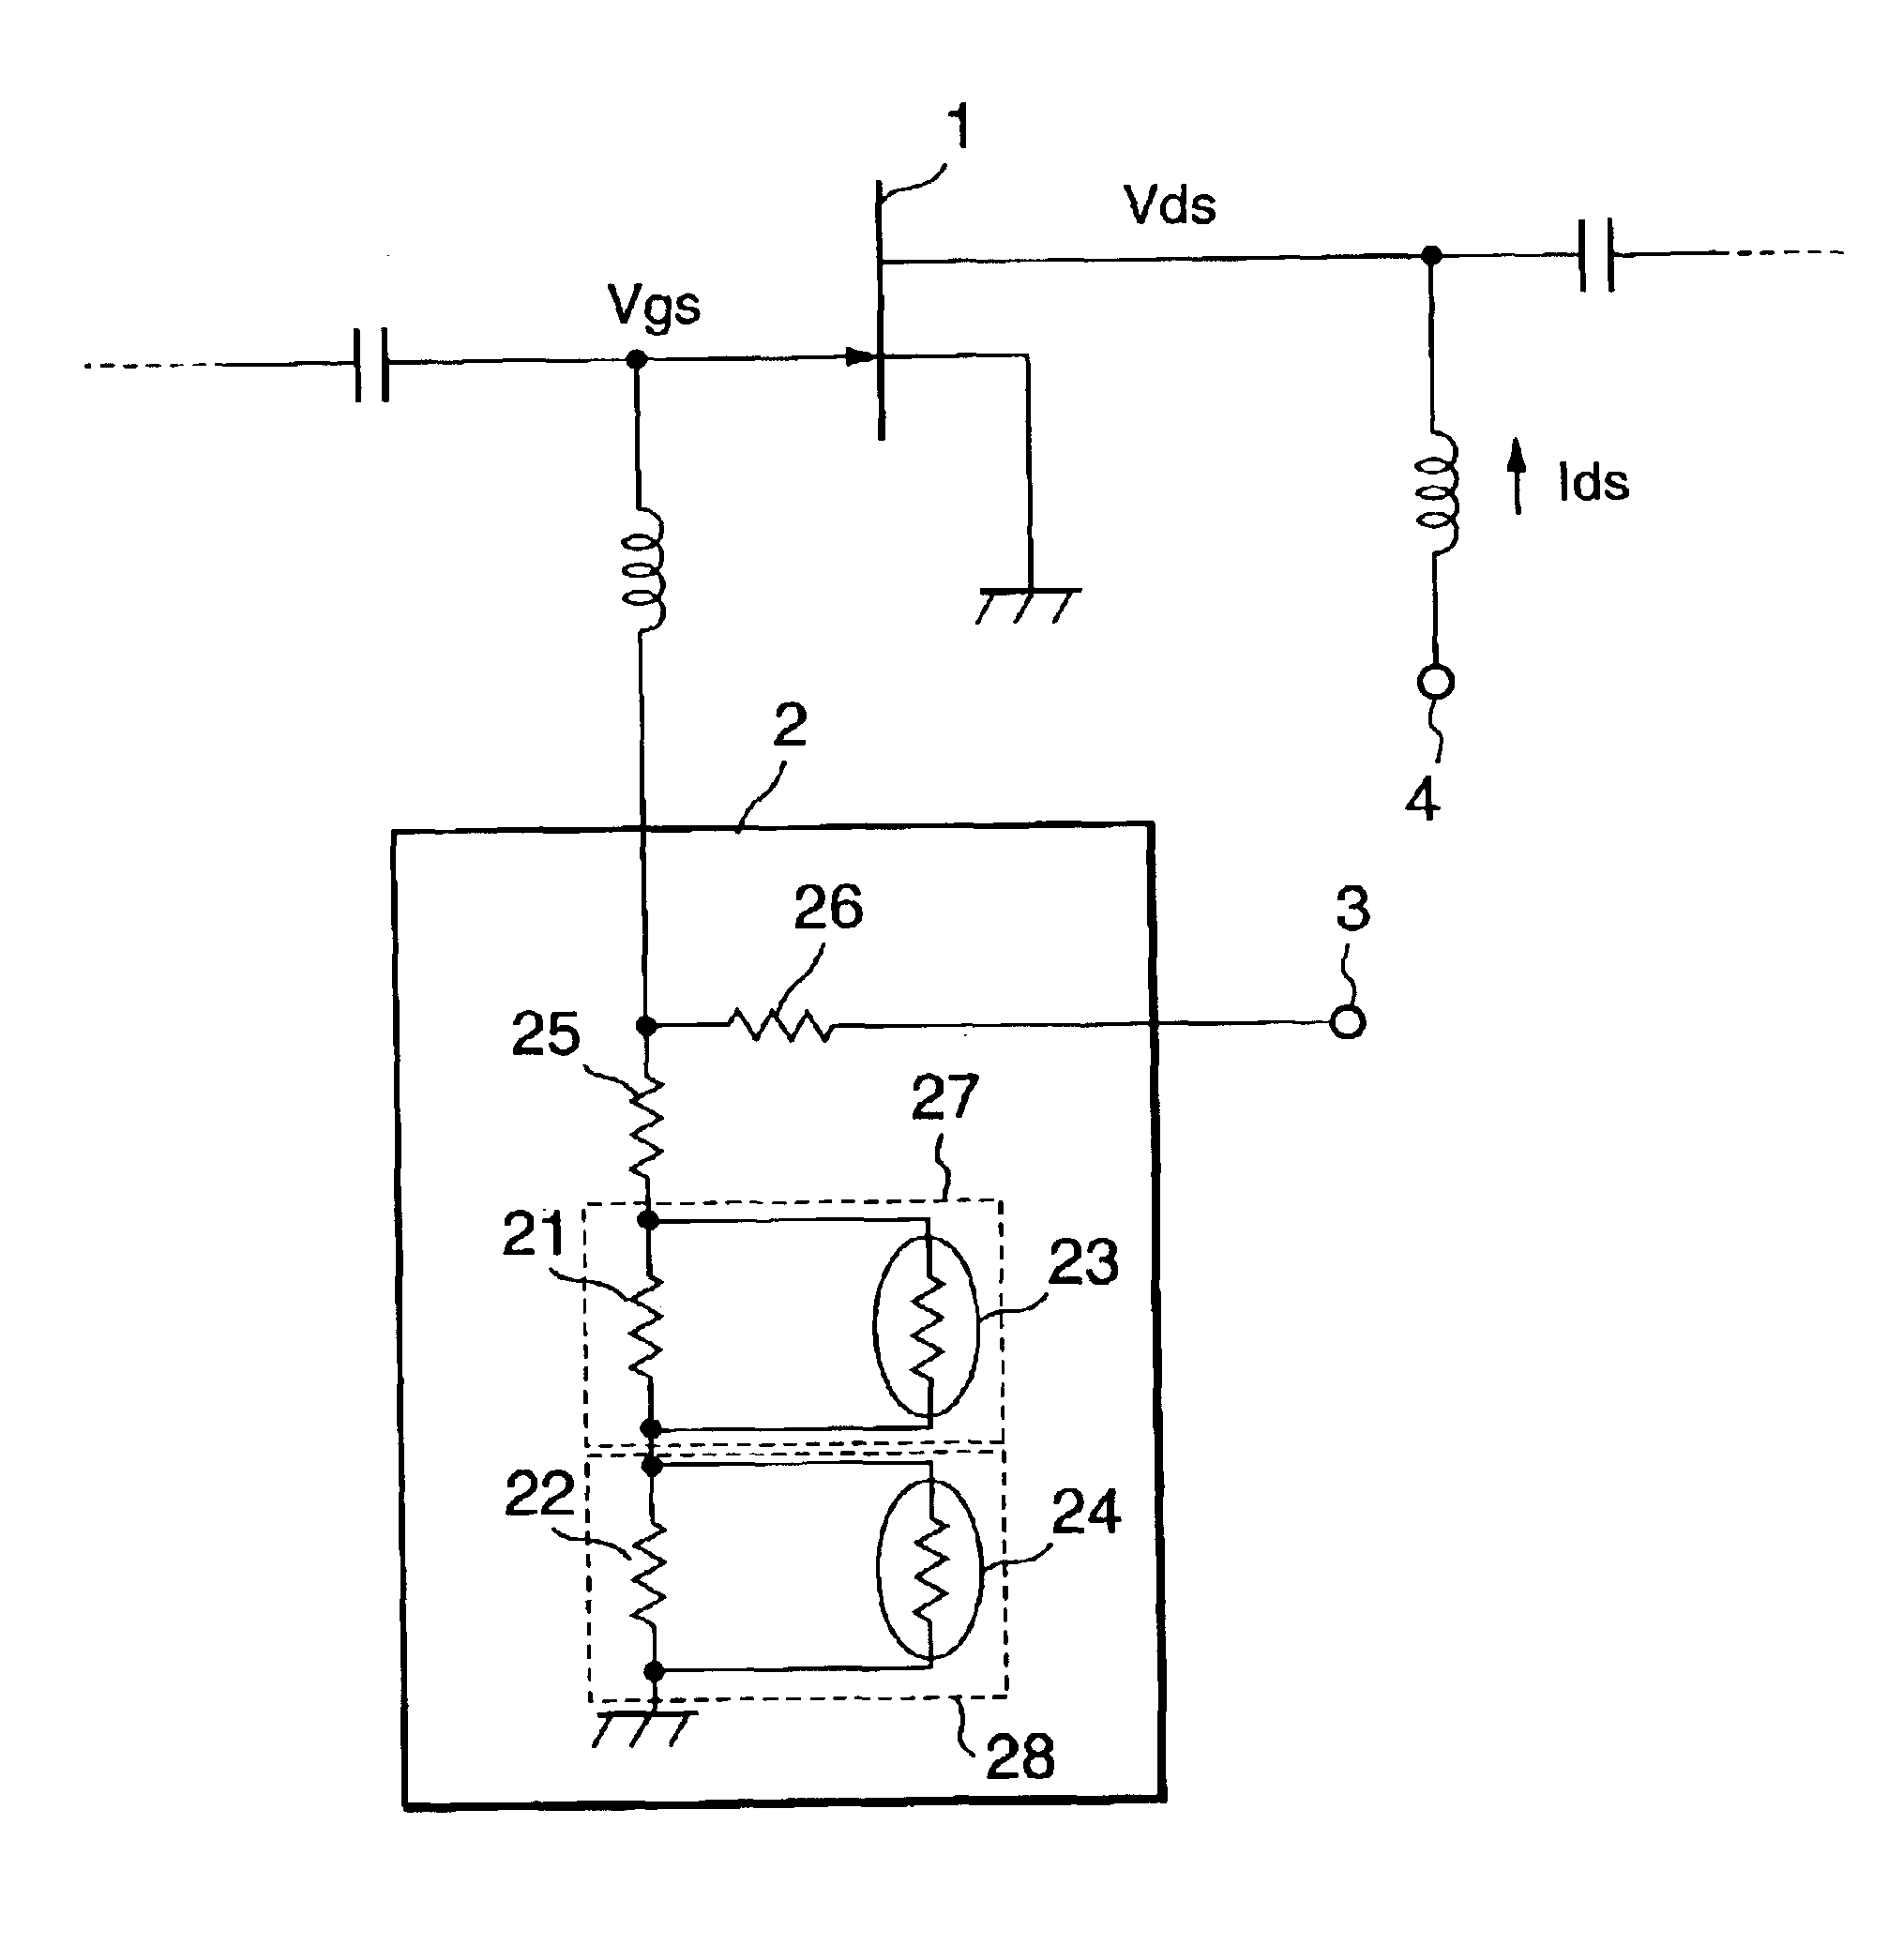 FET amplifier with temperature-compensating circuit